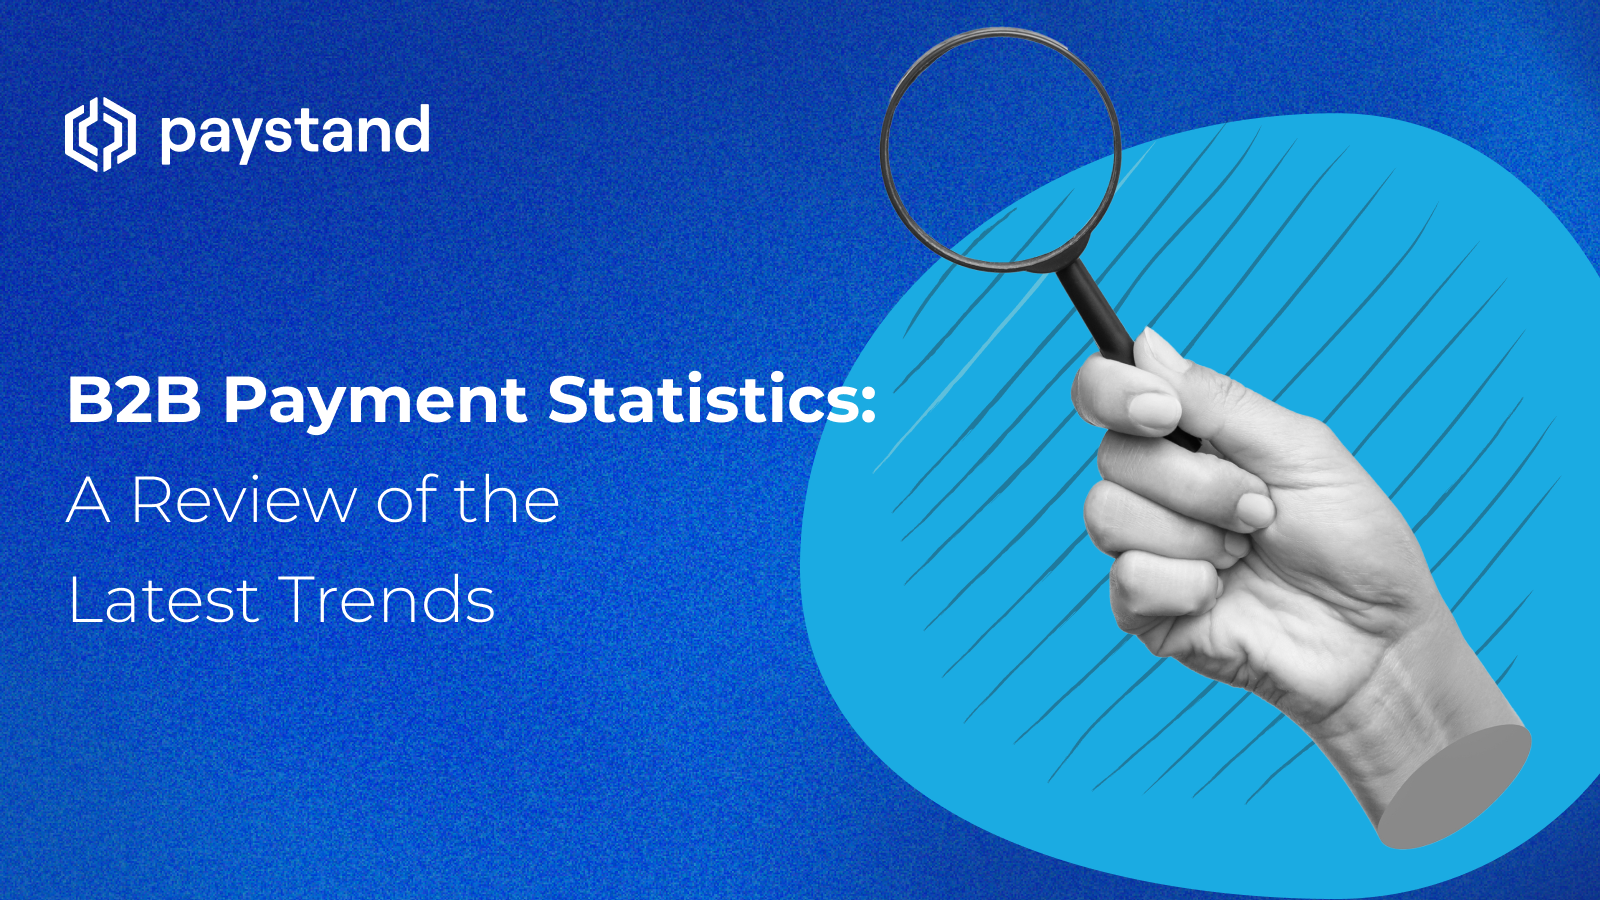 B2B Payment Statistics: A Review of the Latest Trends